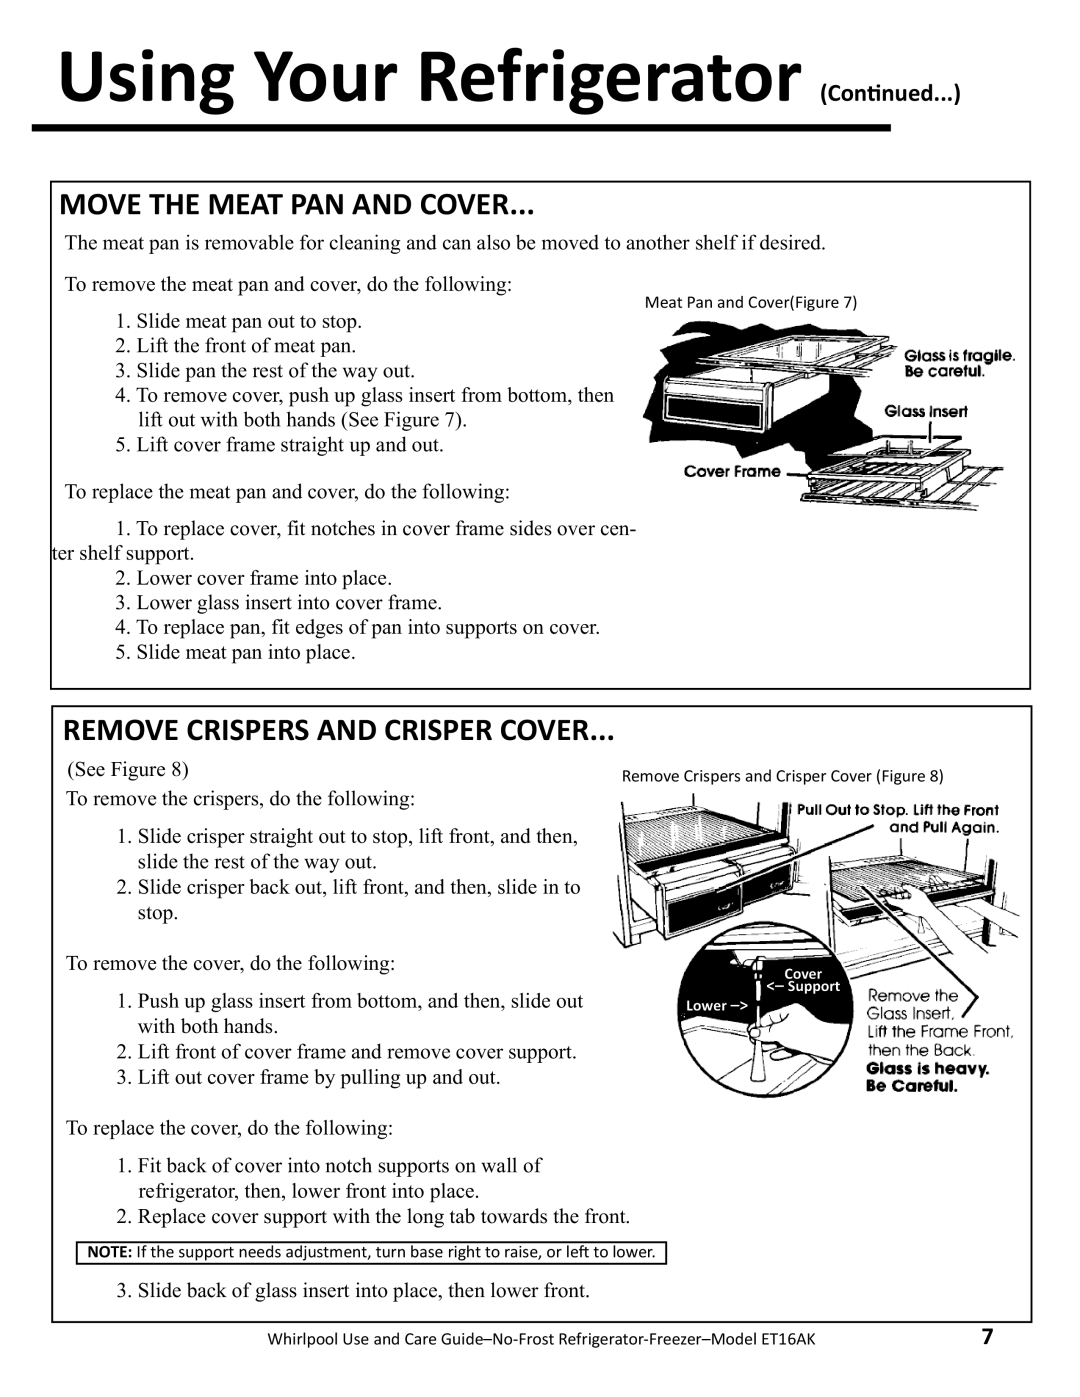 Whirlpool ET16AK manual Move The Meat Pan And Cover, Remove Crispers And Crisper Cover, Using Your Refrigerator Con/nued 